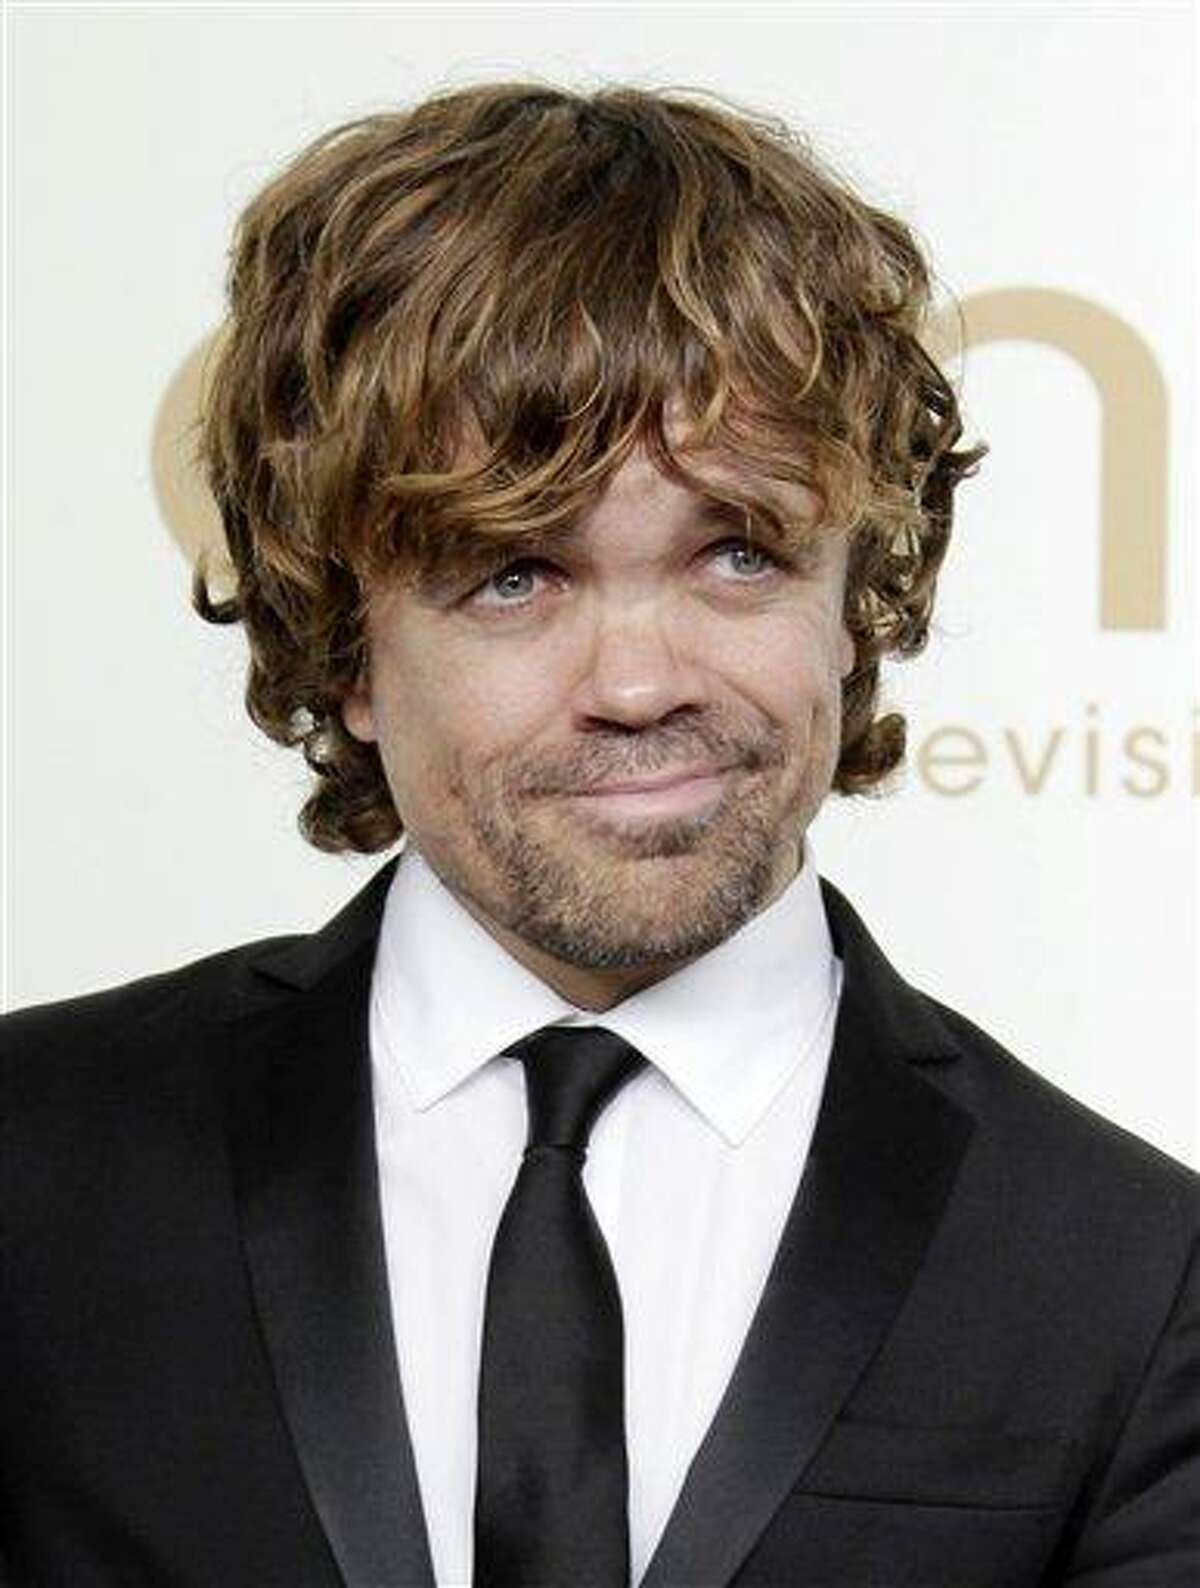 In this file photo, Peter Dinklage from the HBO series "Game of Thrones" poses backstage at the 63rd Primetime Emmy Awards in Los Angeles. Dinklage won the Emmy for best supporting actor in a drama series for his role as Tyrion Lannister. Dinklage, 43, who has been a vegetarian since he was 16, is the national spokesman for Farm Sanctuary's annual Walk for Farm Animals. He has filmed a YouTube video and will spend his off season promoting the group's campaign to change the way society views and treats farm animals. (AP)